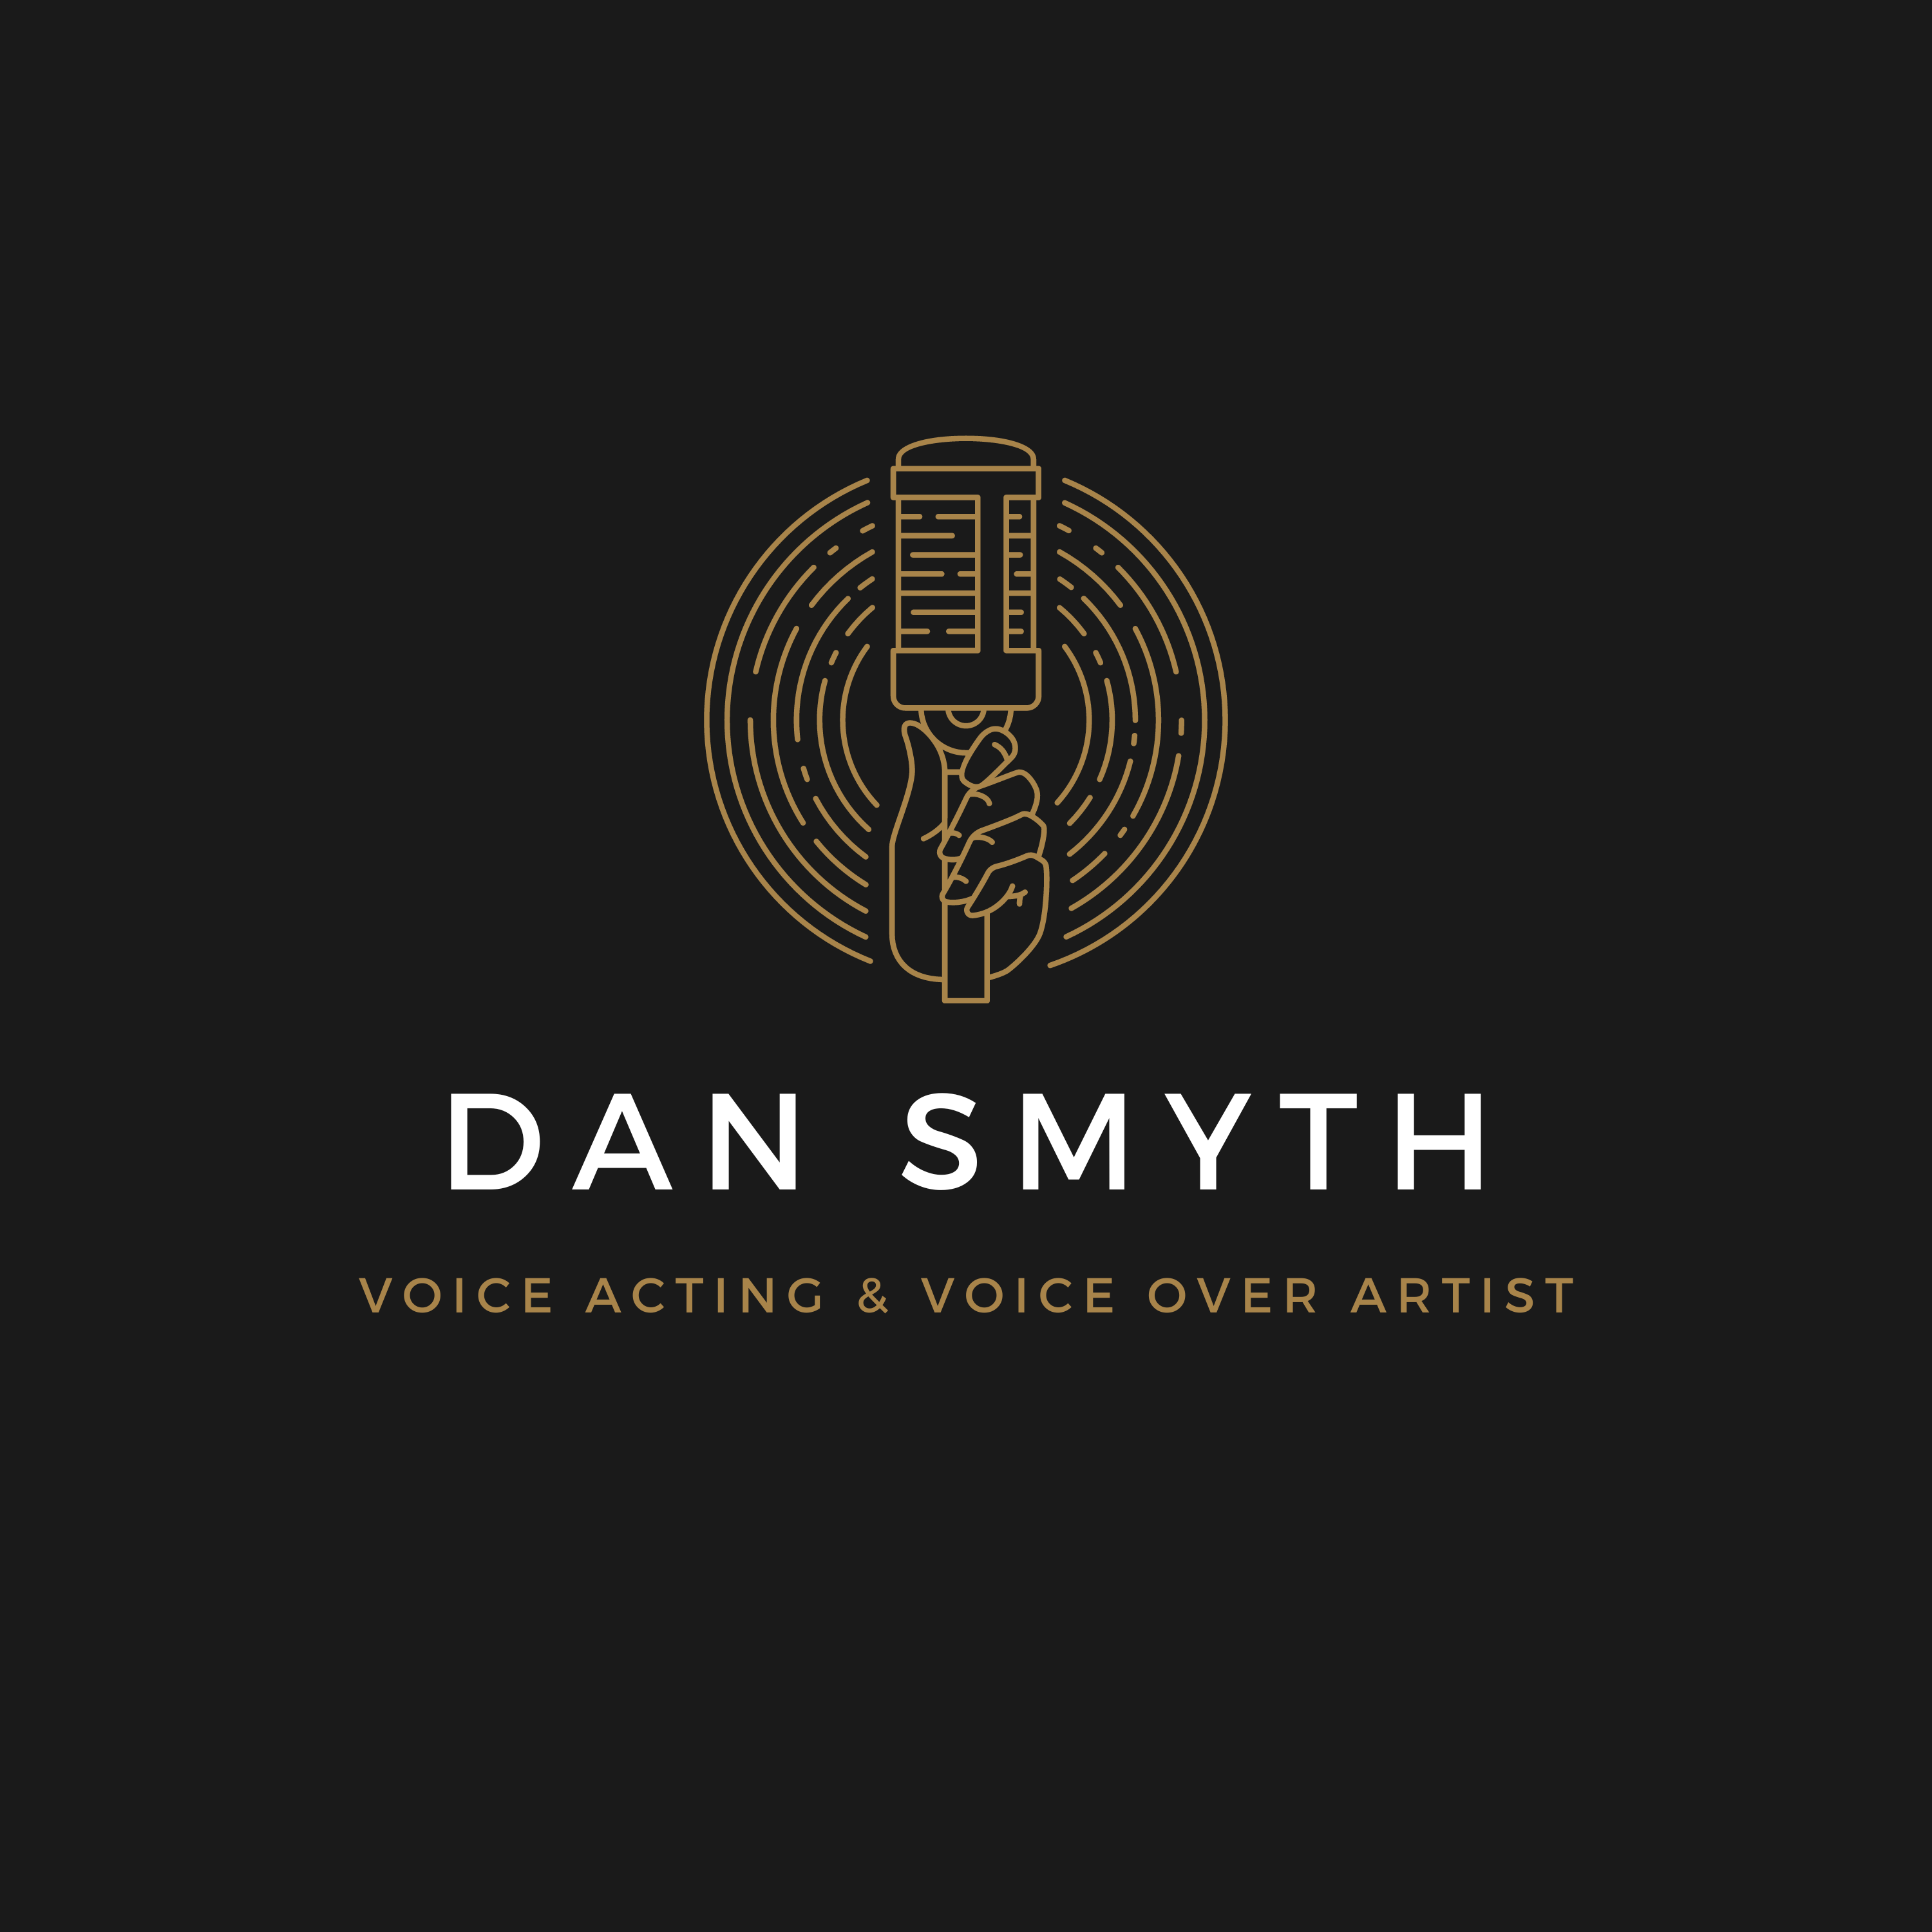 Dan Smyth Voice – Voice Acting and Voice Over Work